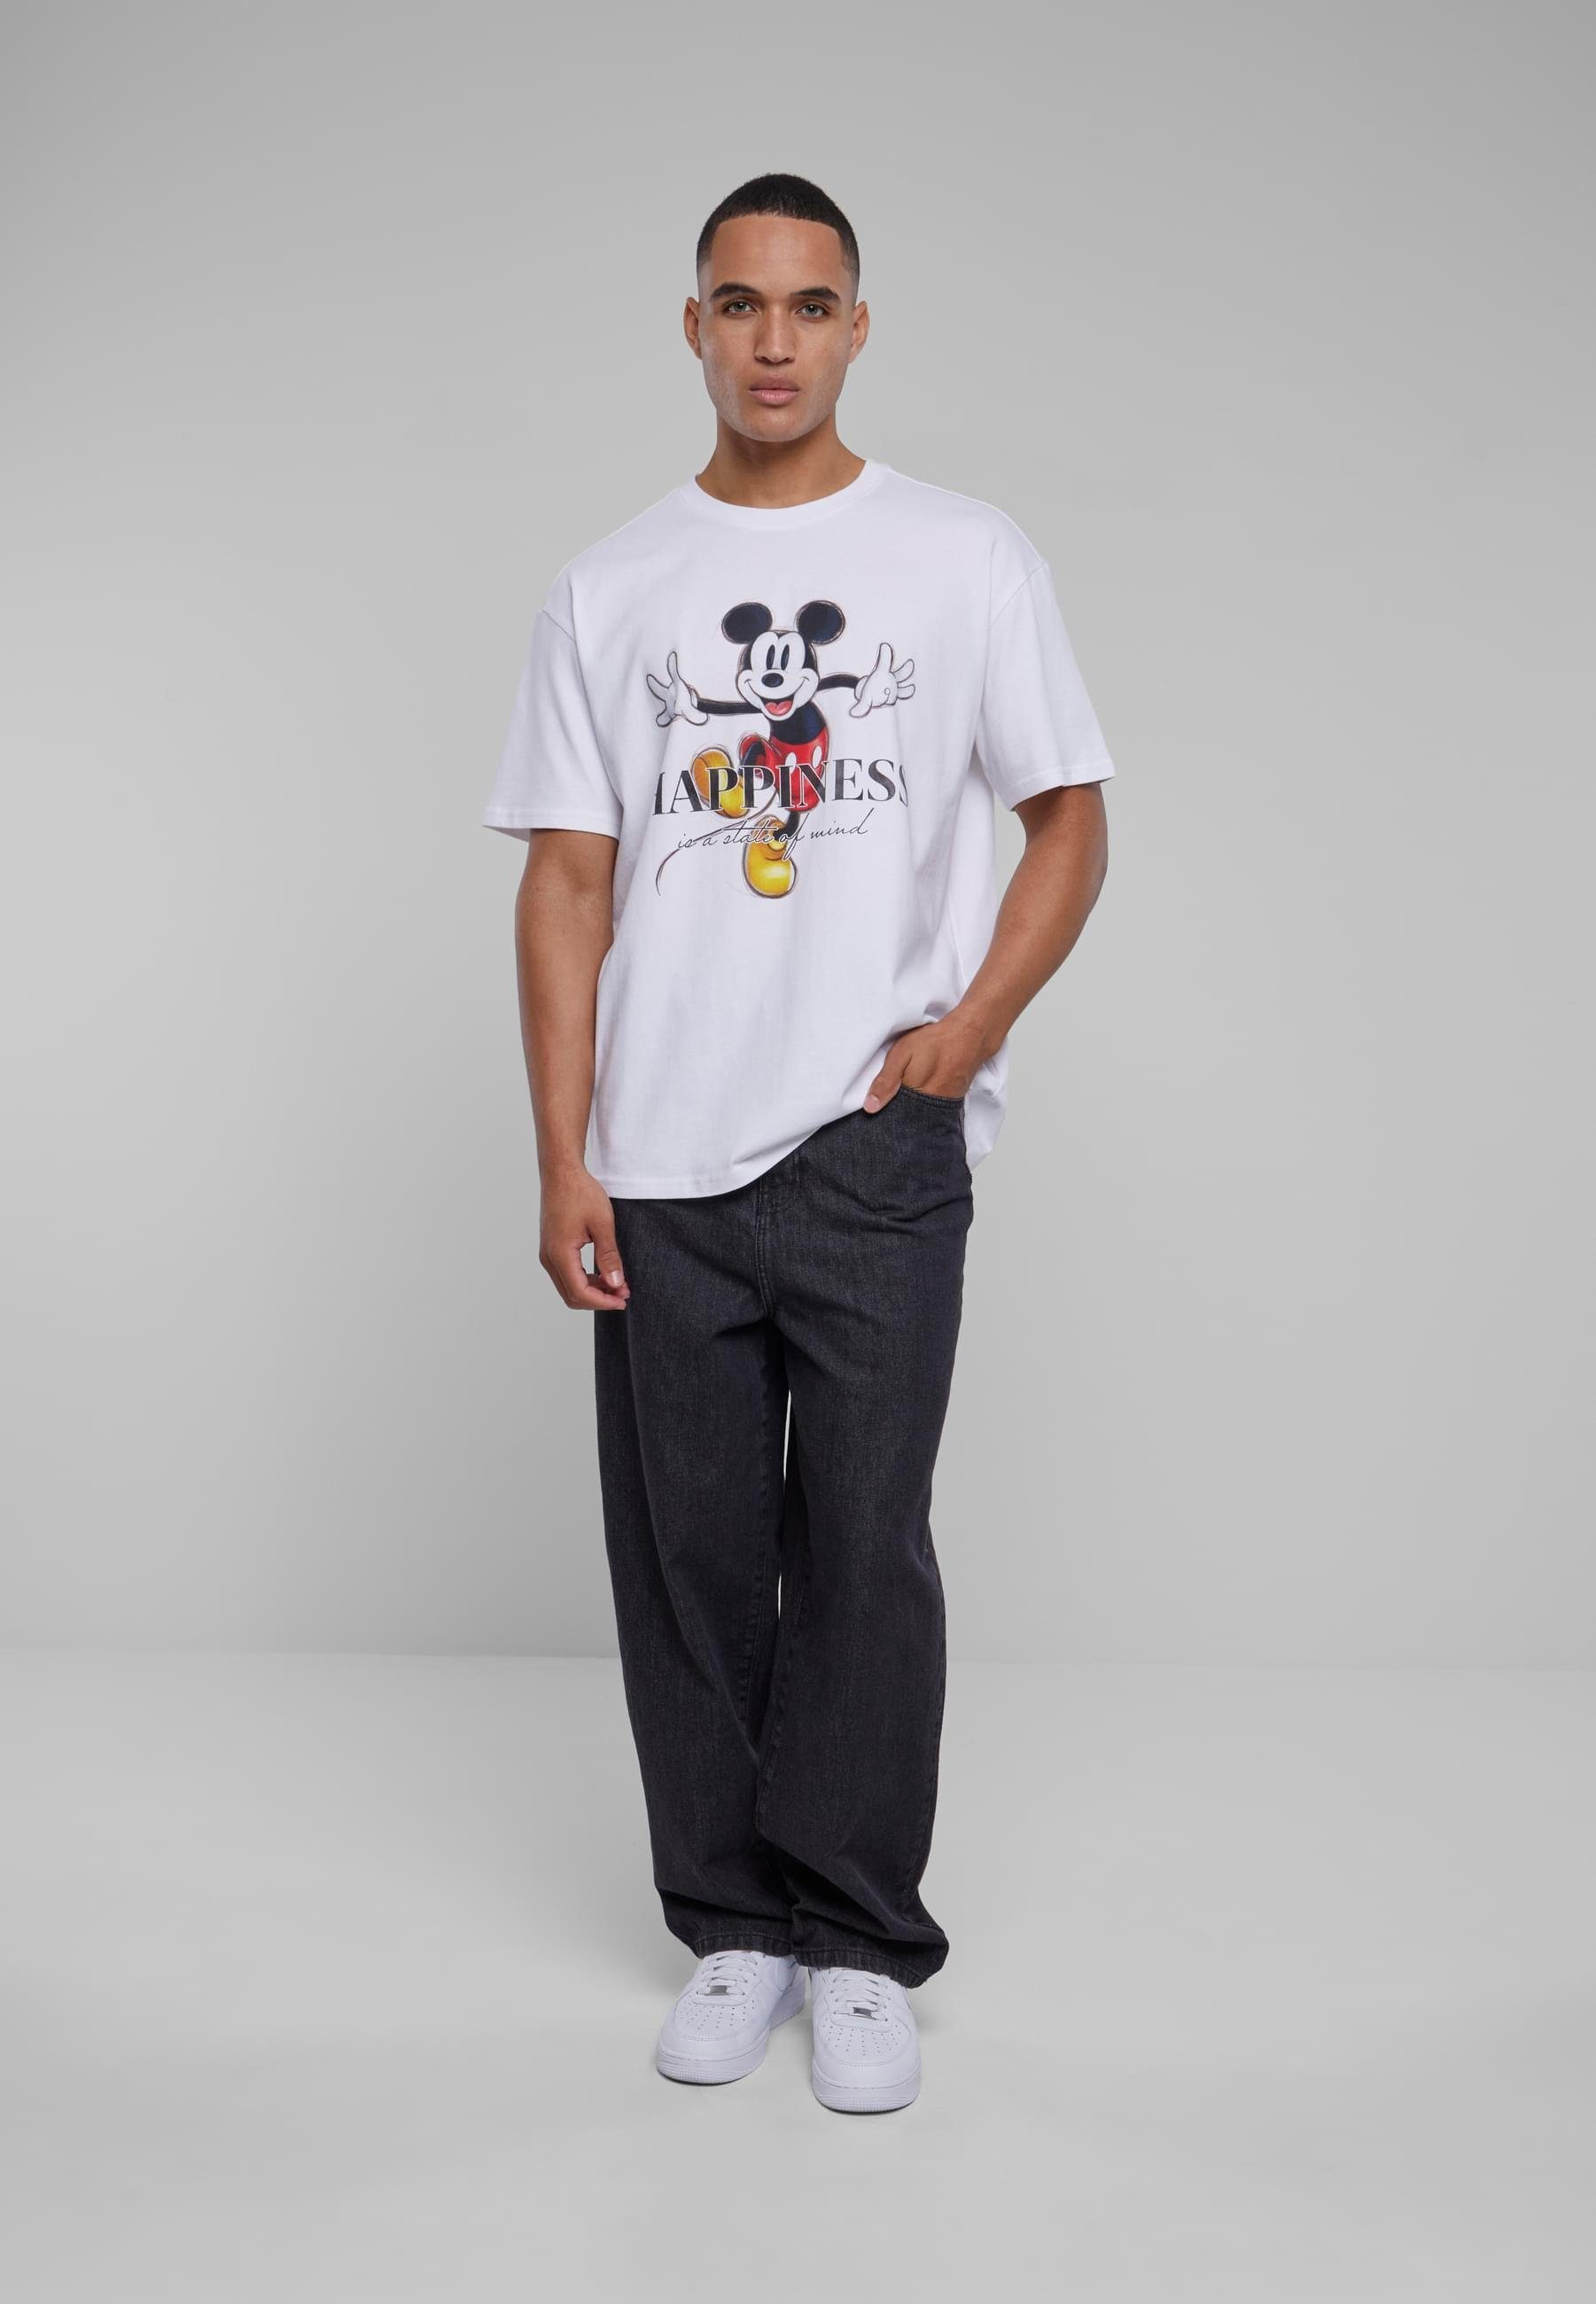 Happiness Tee Oversize Unisex Mickey Mister T-Shirt (1-tlg) Disney by Upscale 100 Tee